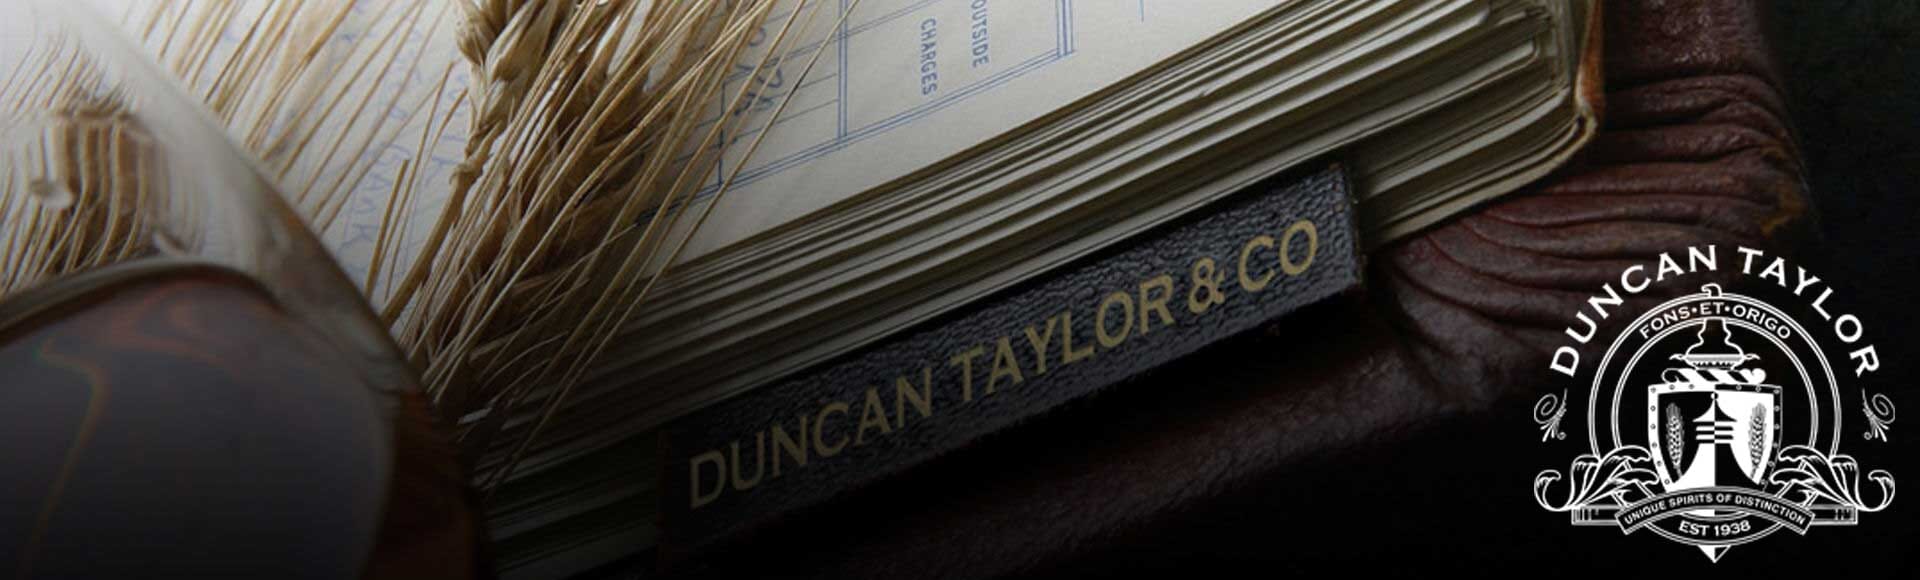 Duncan Taylor Scotch Whisky of Distinction